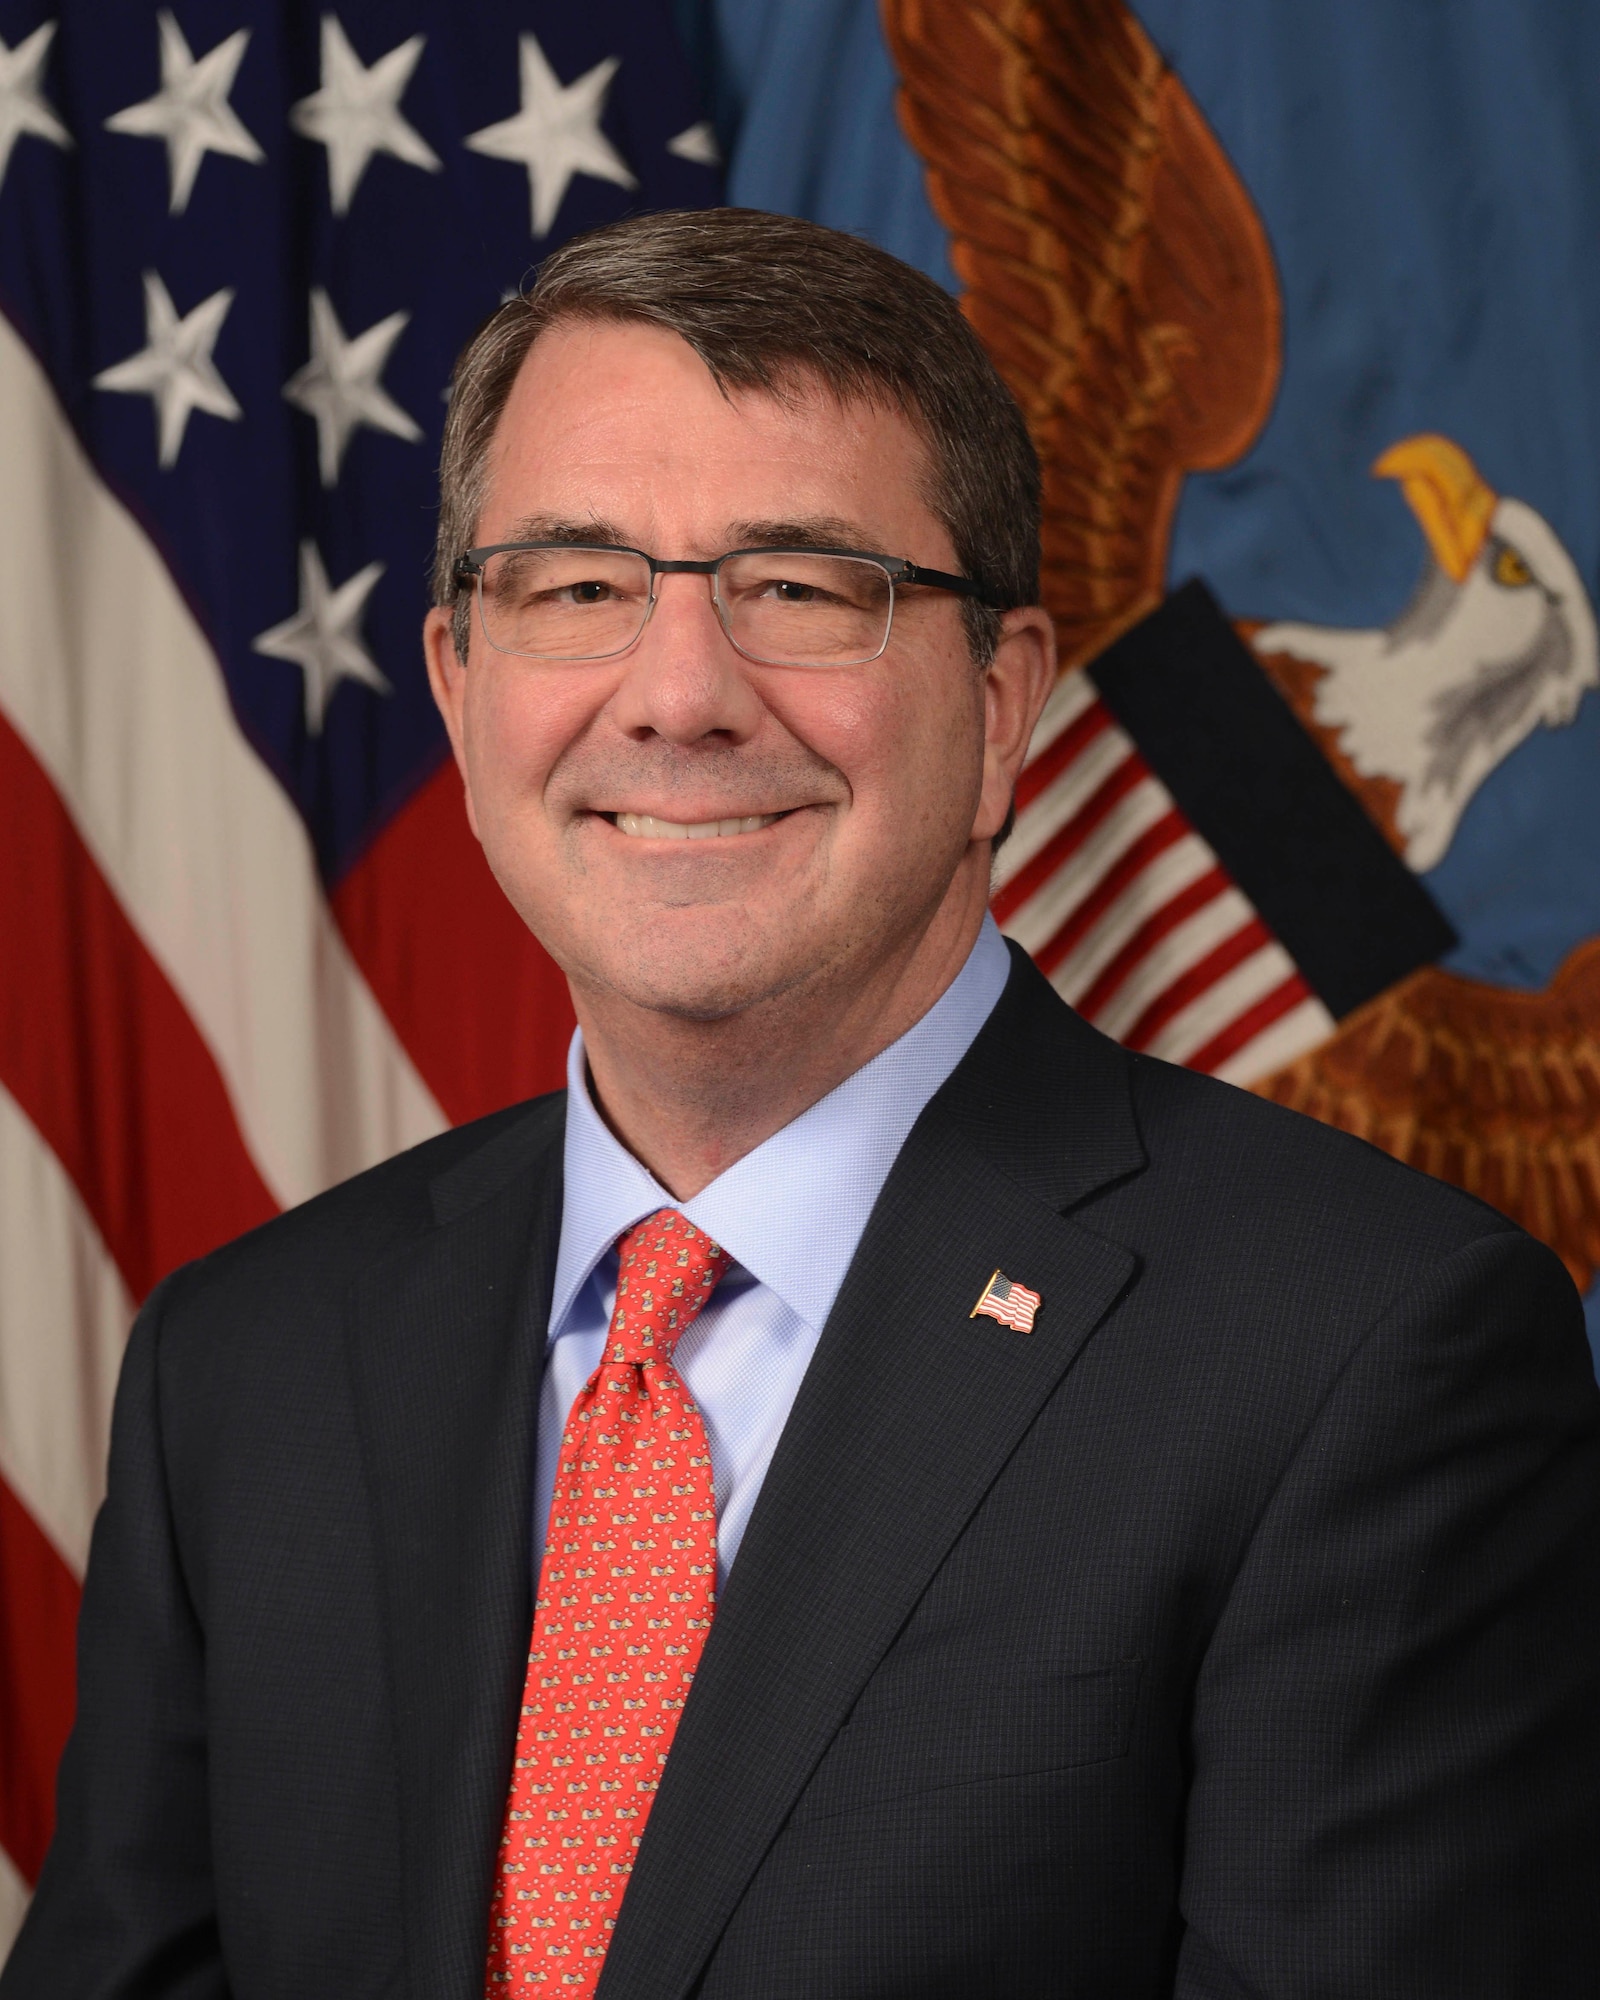 Ash Carter became the 25th secretary of Defense Feb. 17, after having served previously as deputy defense secretary, defense acquisition chief and assistant secretary for global strategic affairs.